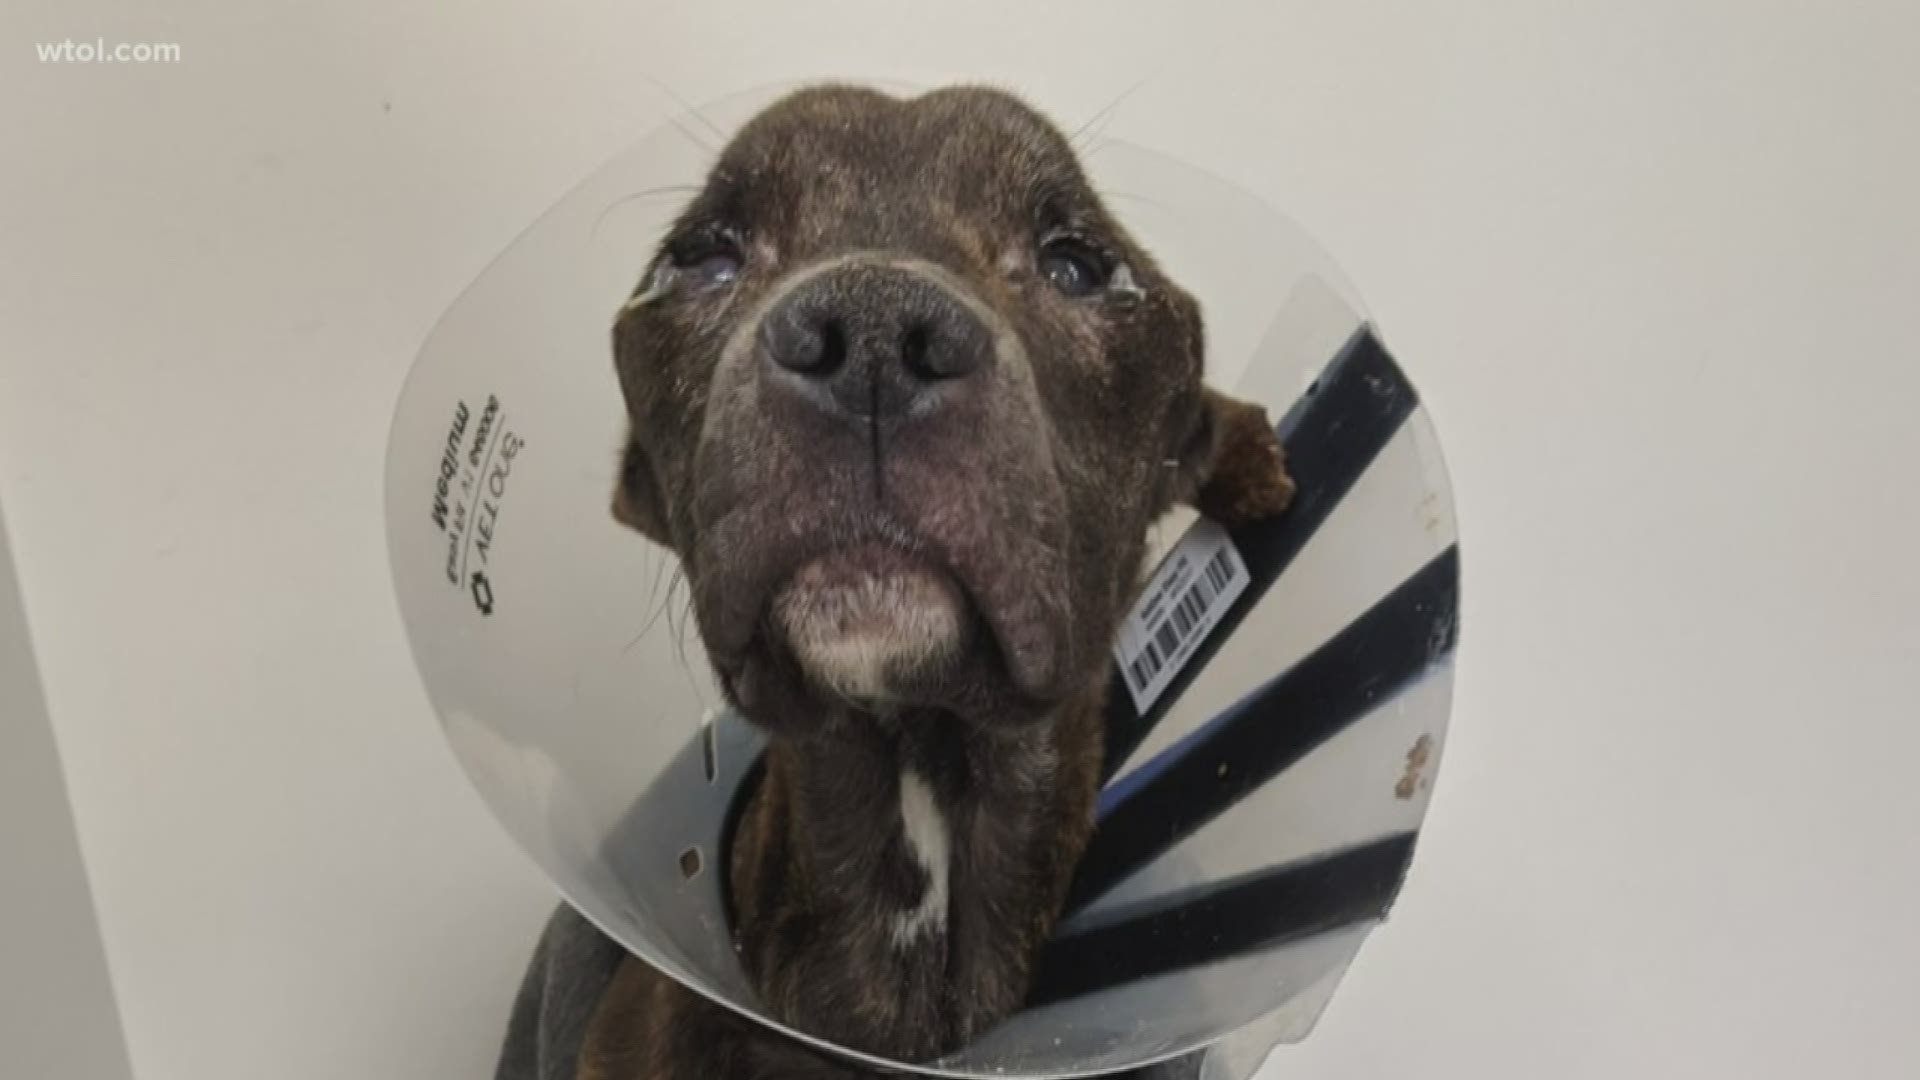 Bogey was described as 'almost dead' when he was surrendered to the Lucas County Pit Crew earlier this month.